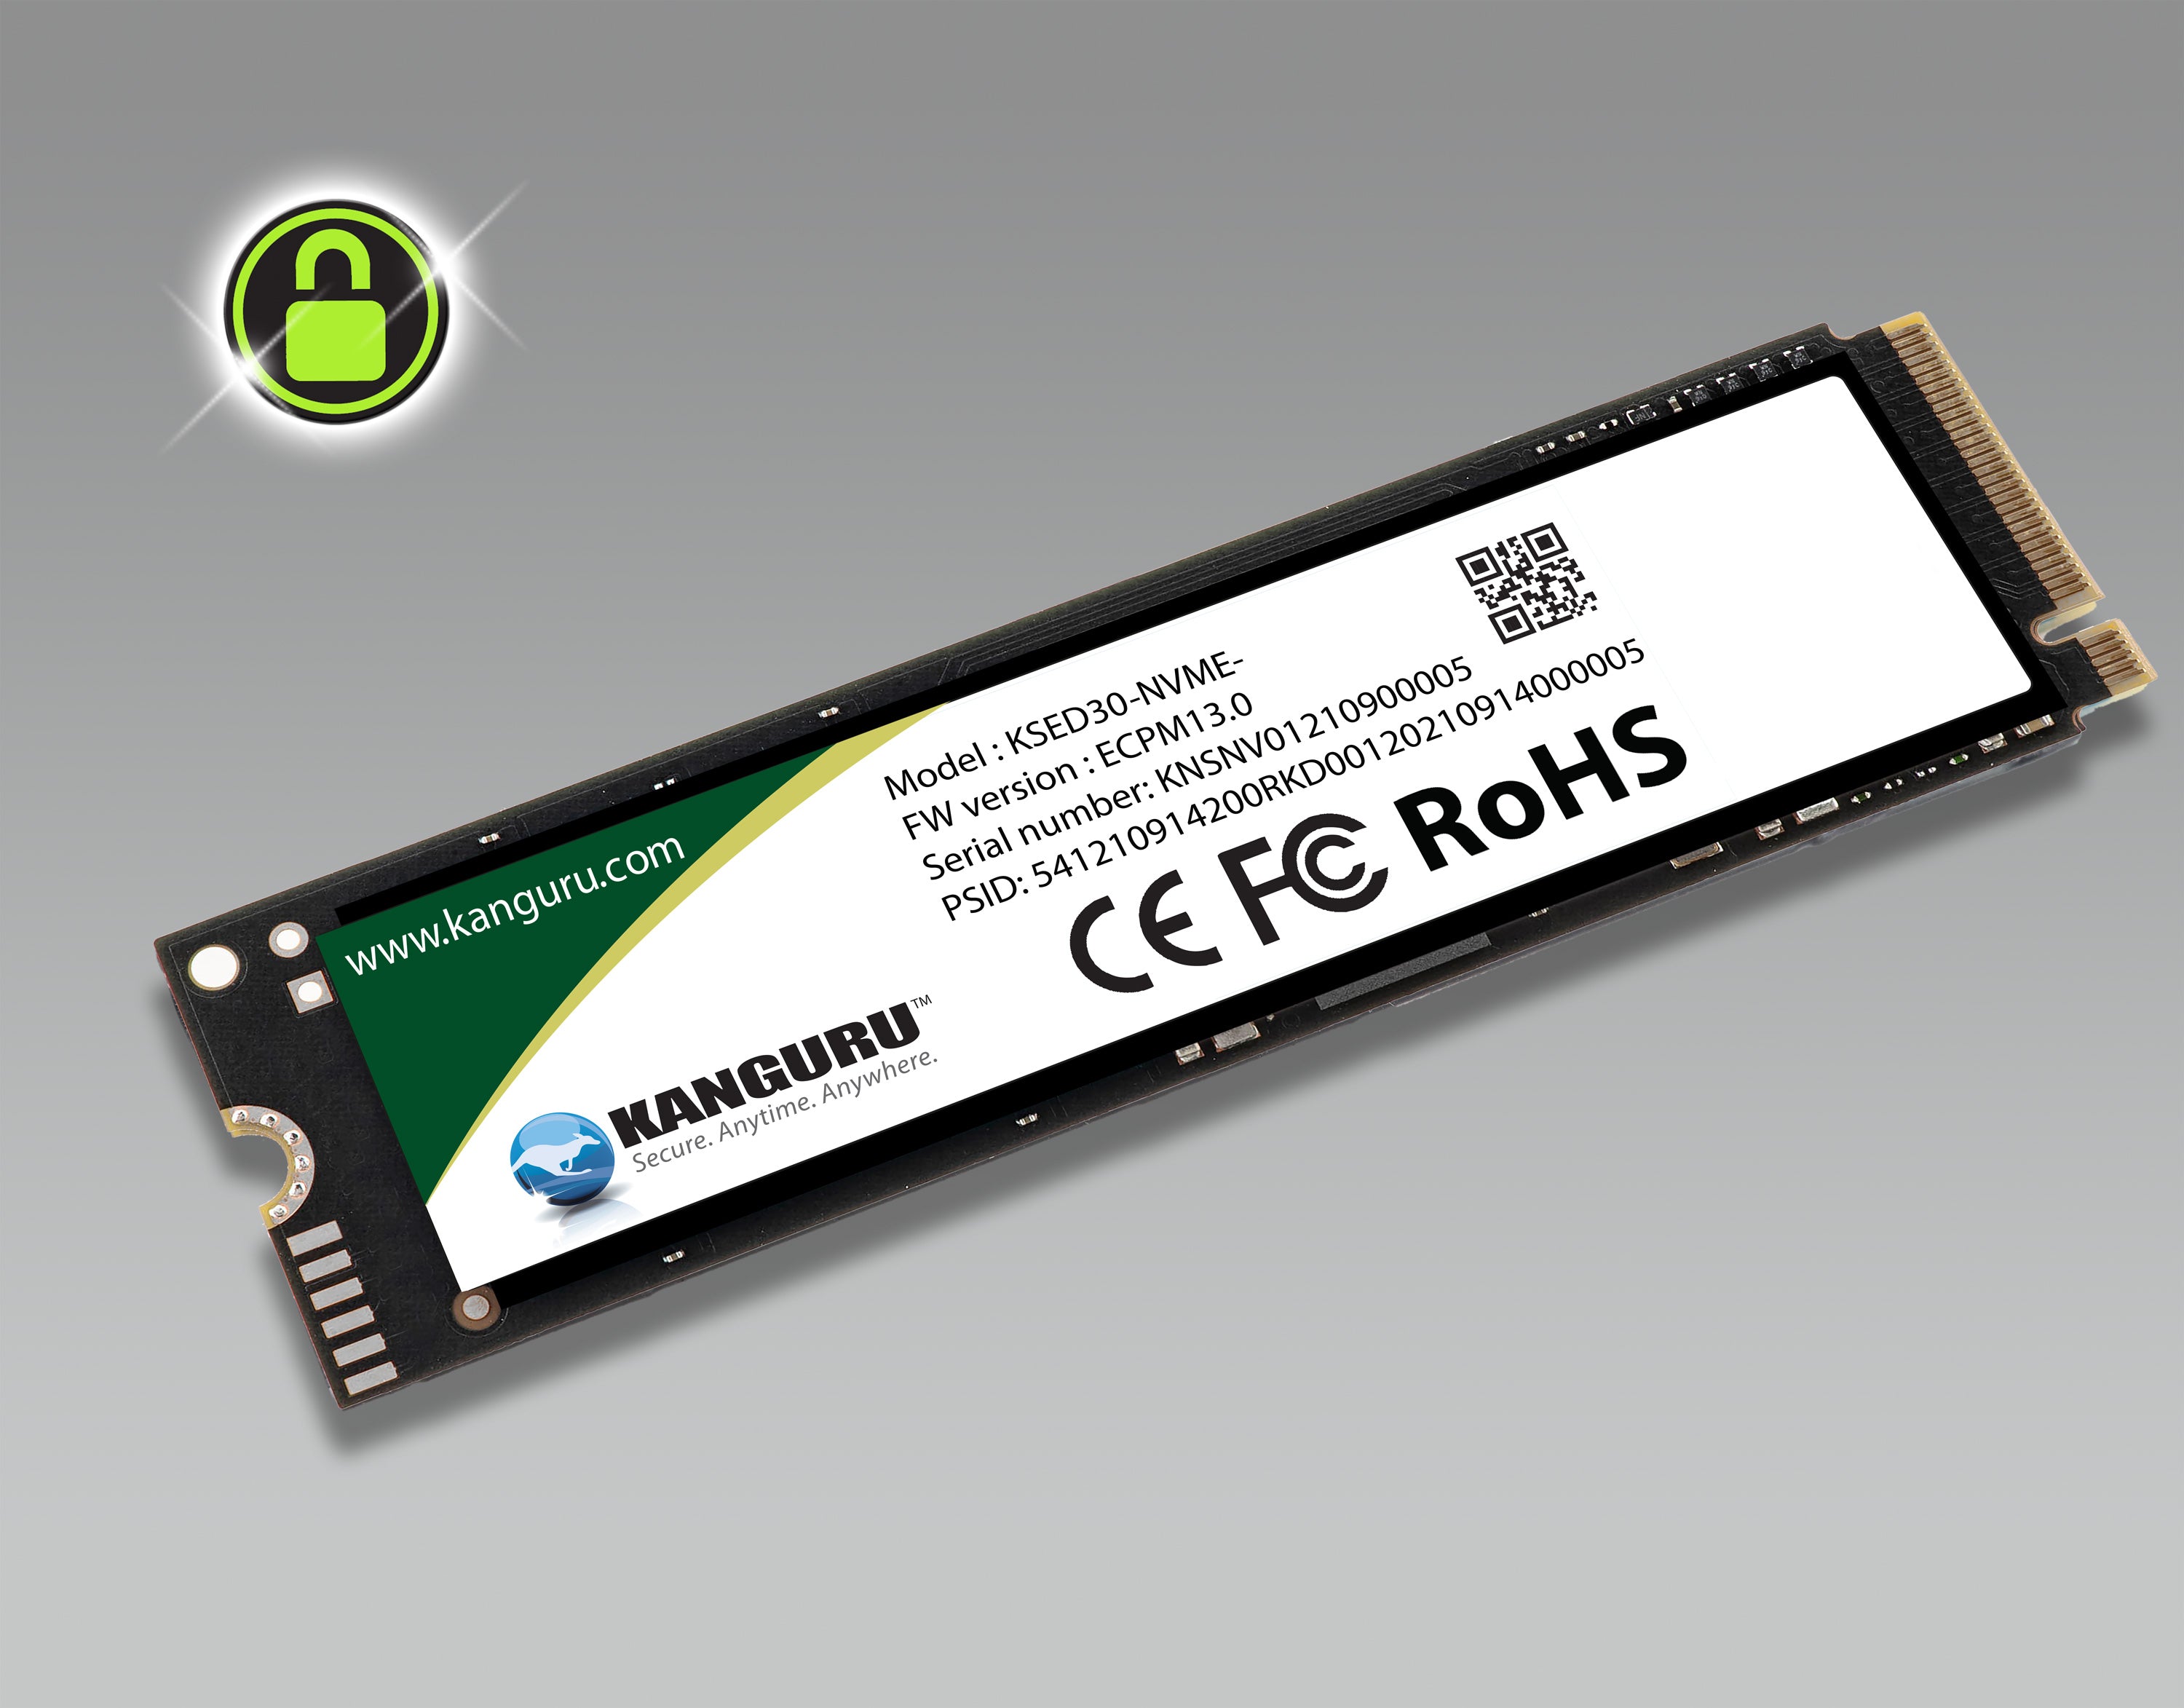 The Kanguru Opal SED30 M.2 NVMe Internal Self-Encrypting Solid State Drive is ideal for any organization or individual seeking to secure and confidently lock down data on computer devices.